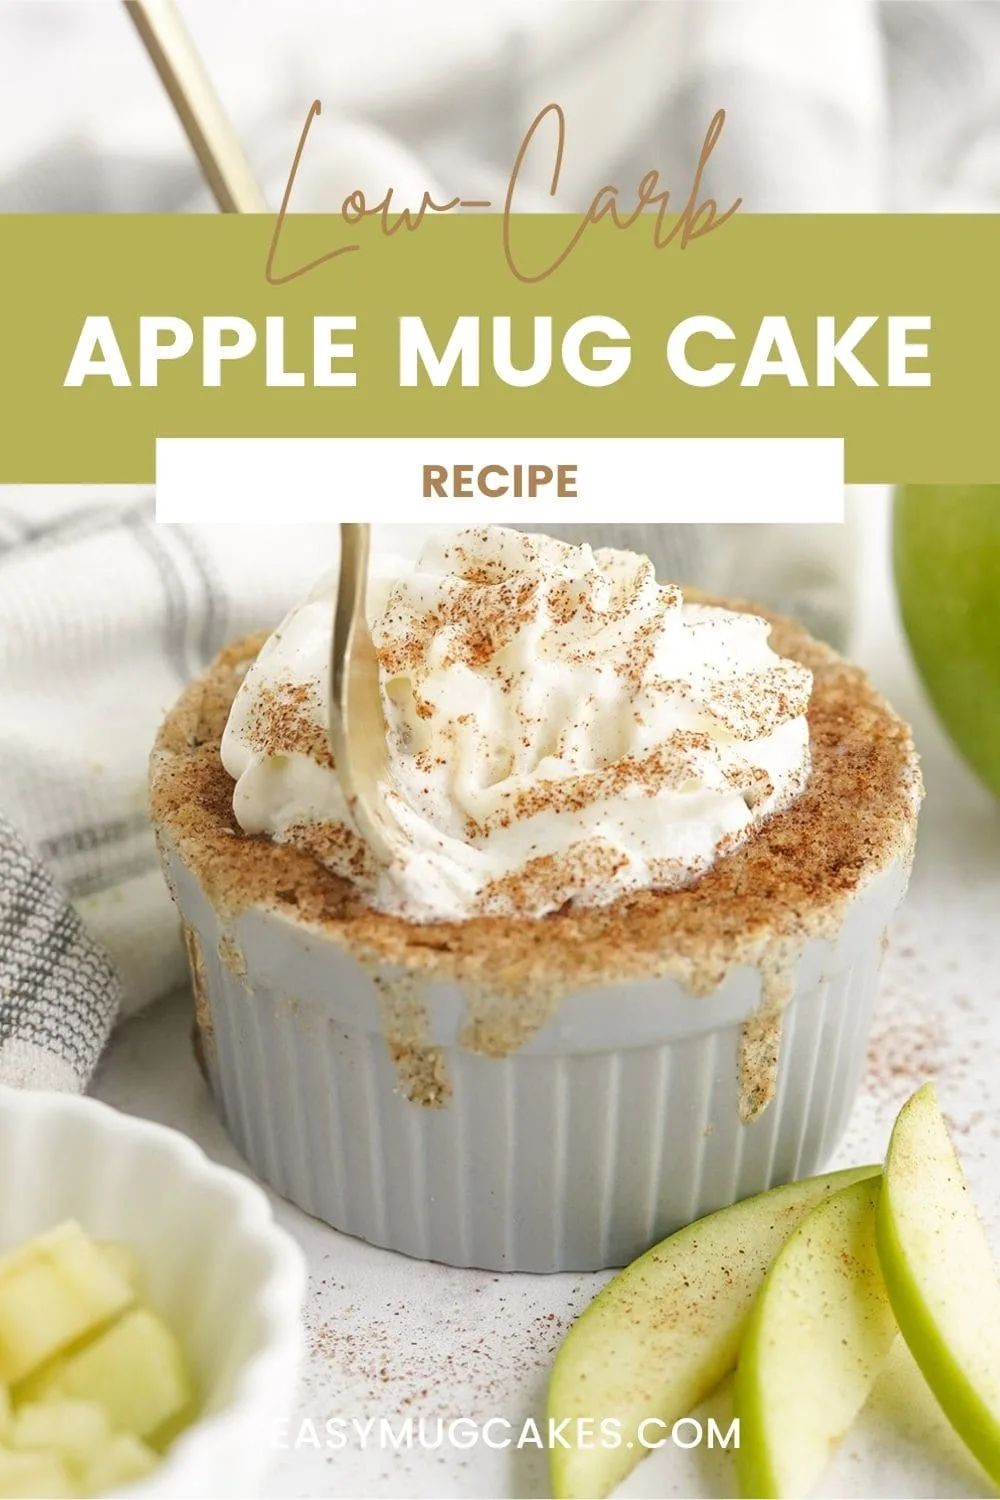 Apple mug cake topped with whipped cream and cinnamon.